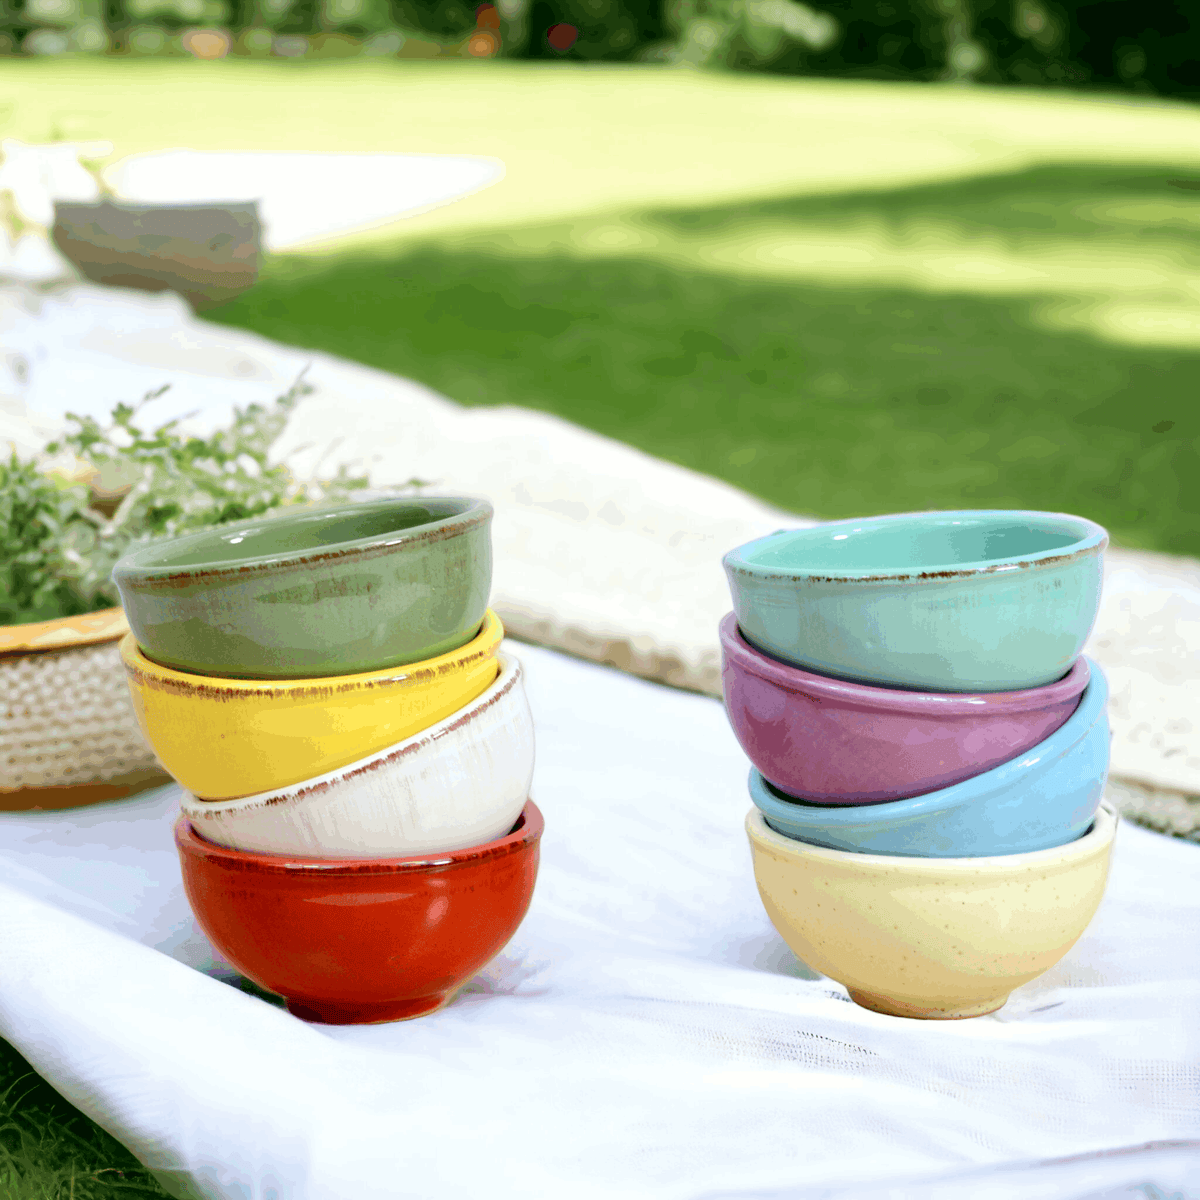 Tuscan Ceramic Dipping Bowls, Set of 4, Made in Italy - My Italian Decor